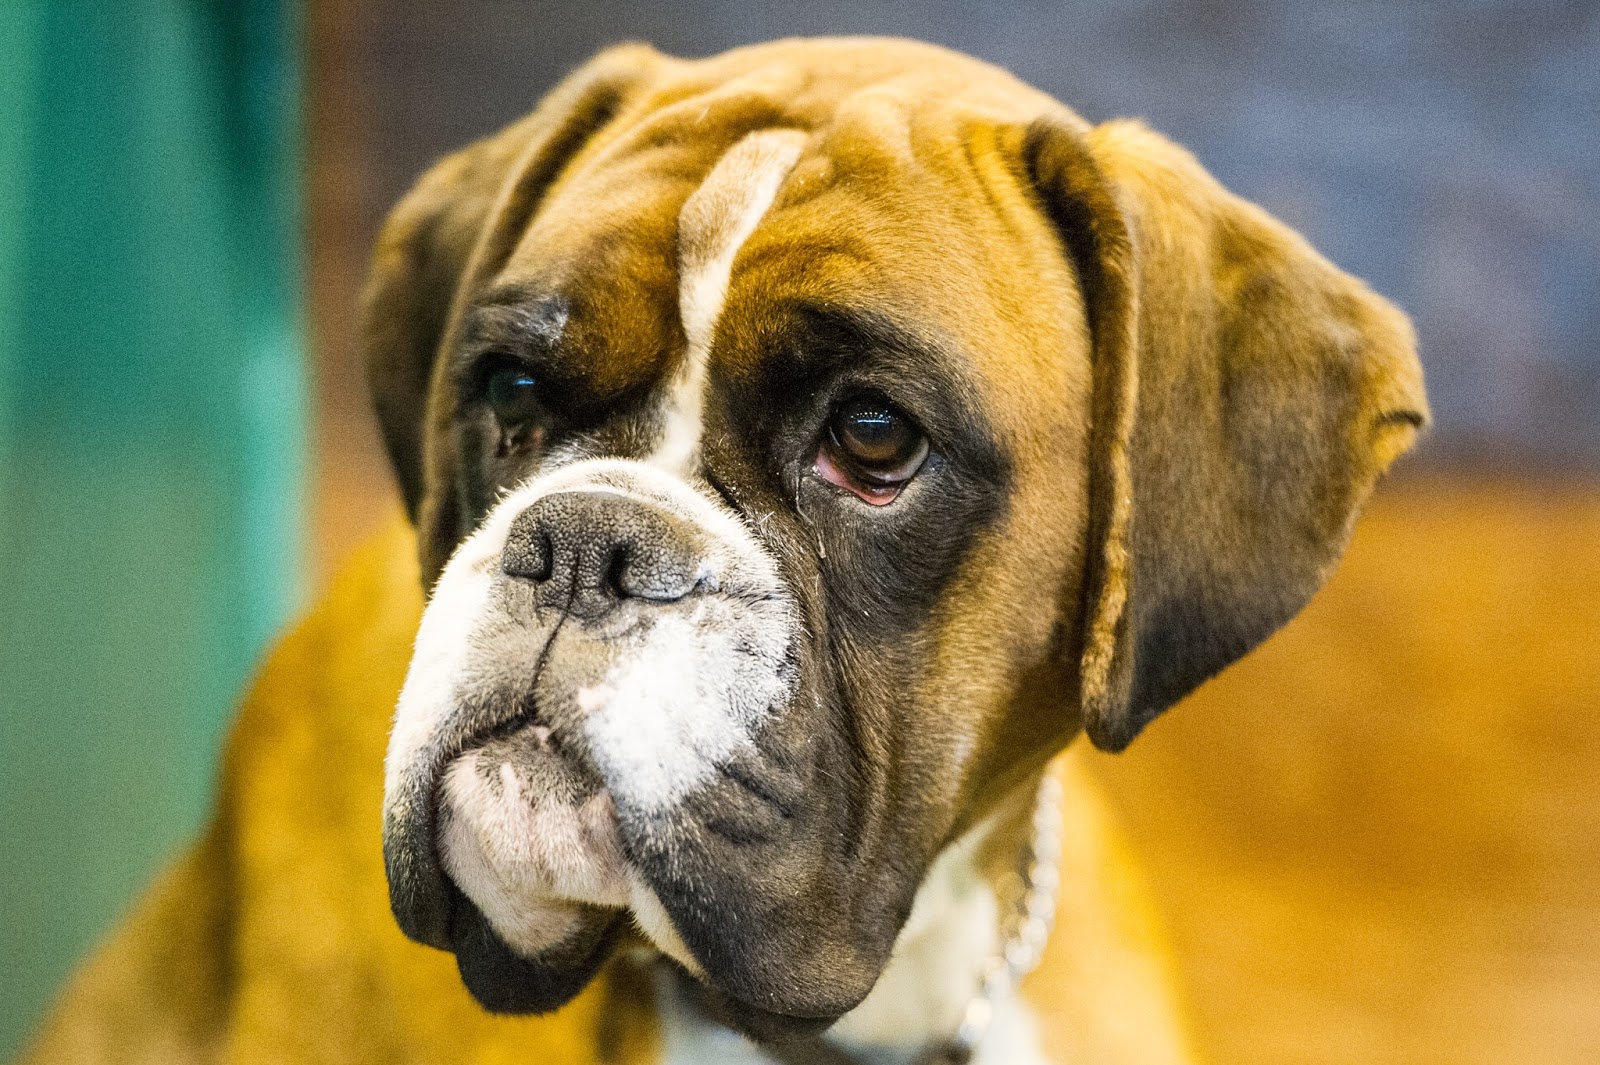 Pedigree Dogs Exposed - The Blog: CRUFTS 2017: Boxer noses